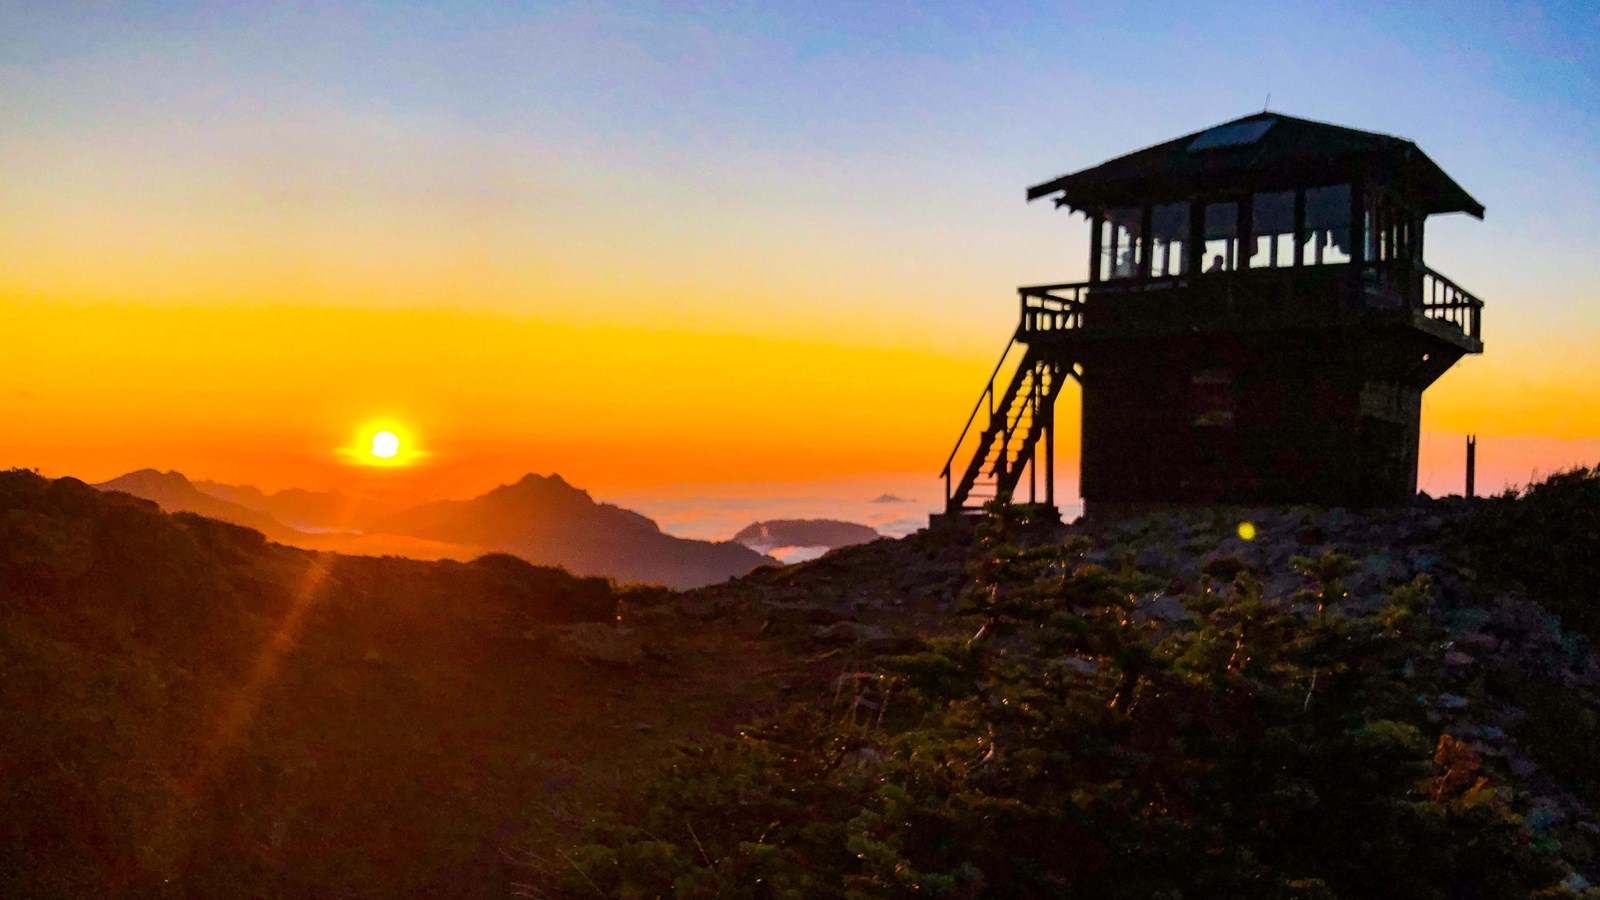 Silhouette of wooden fire lookout against colorful sunset with mountains